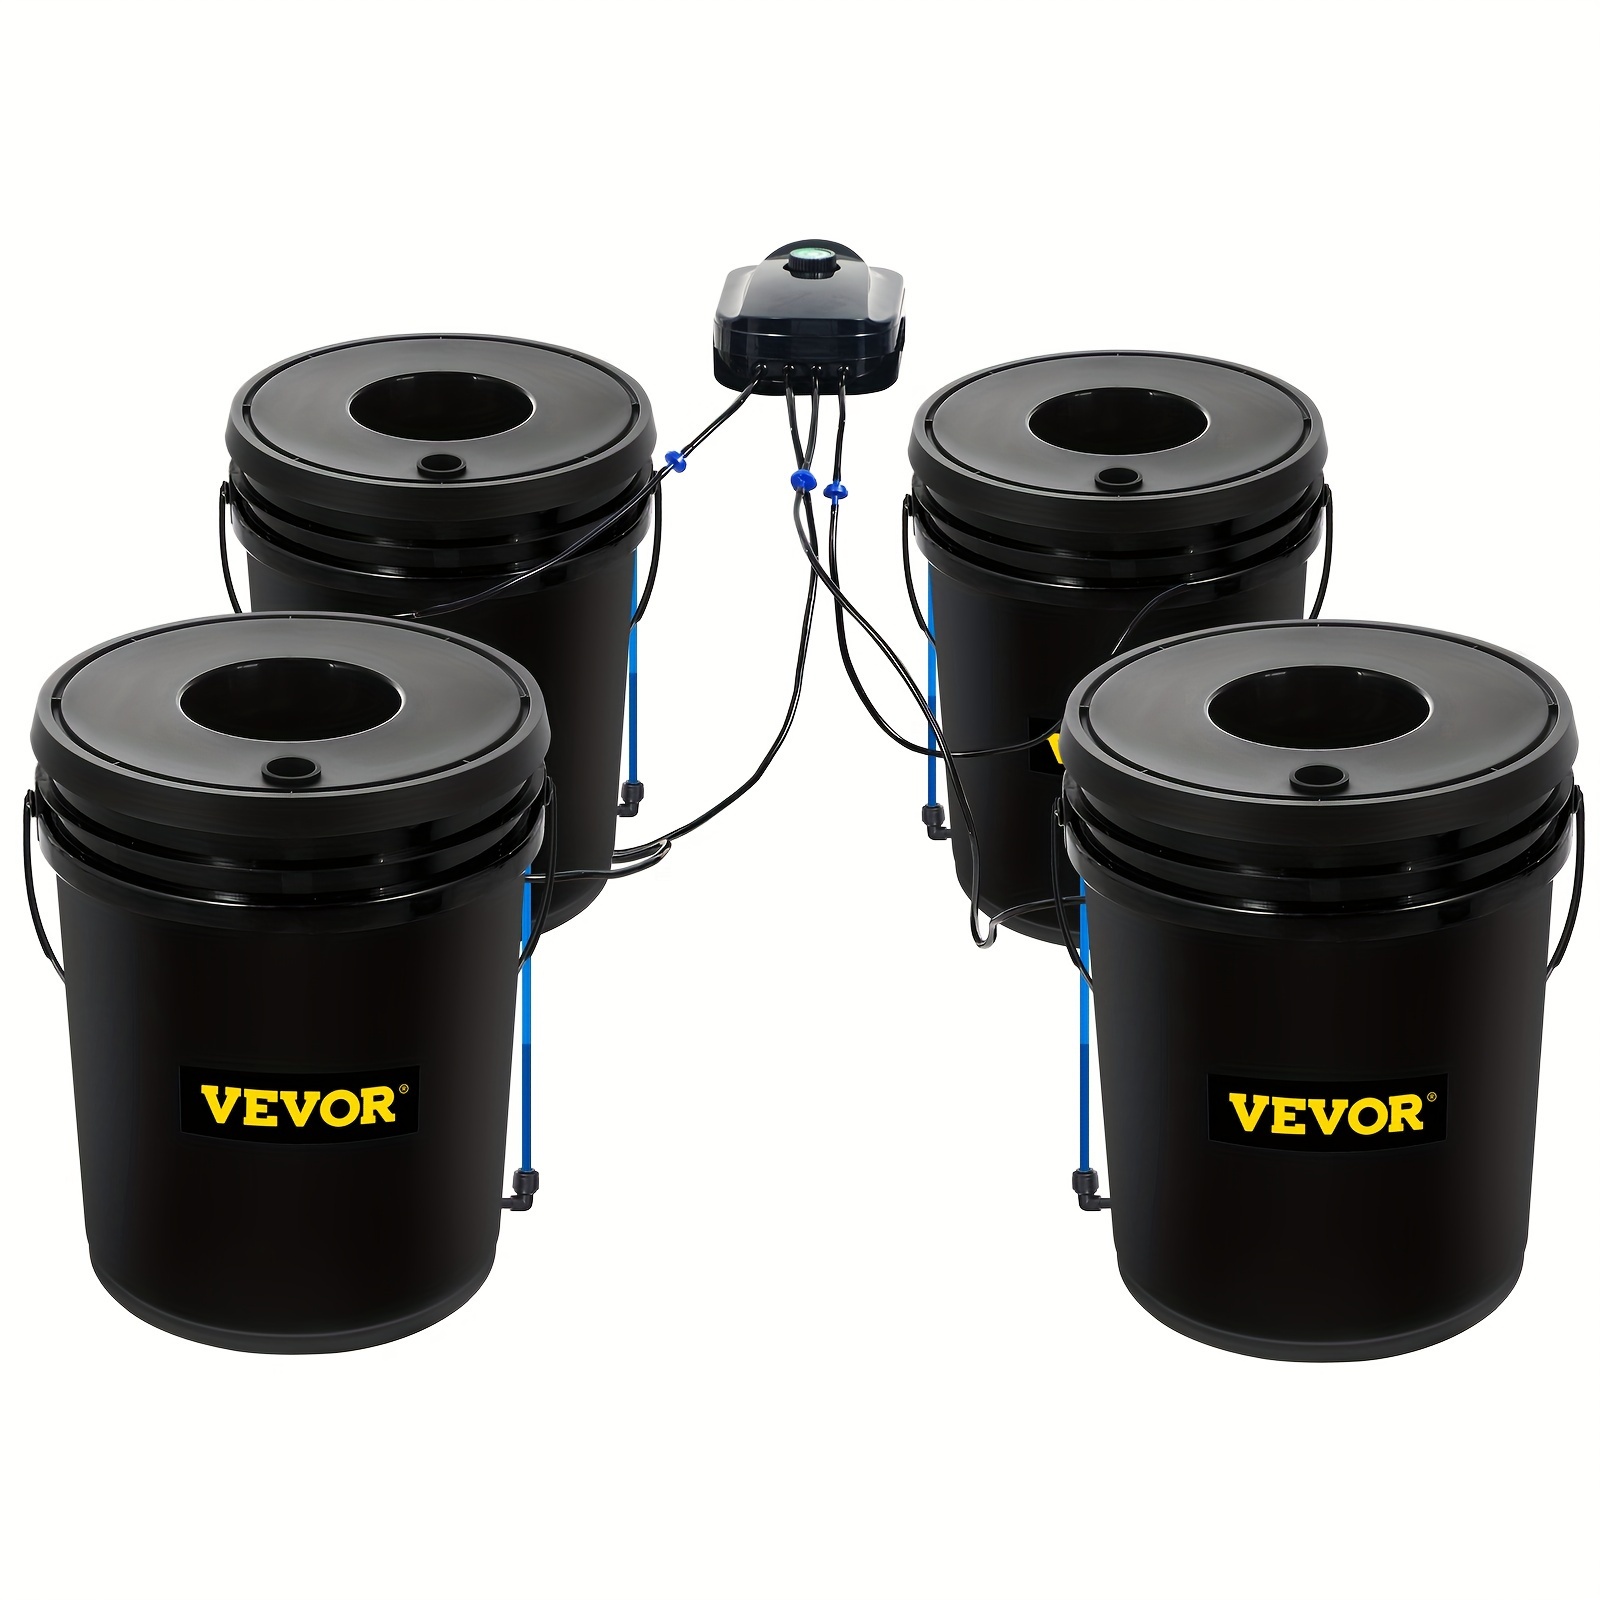 

Vevor 4 Buckets Dwc Hydroponic System, 5 Gallon, Deep Culture, Plants Grow Kit With Pump, Air Stone And Water Level Device, For Indoor/outdoor Leafy Vegetables, Black